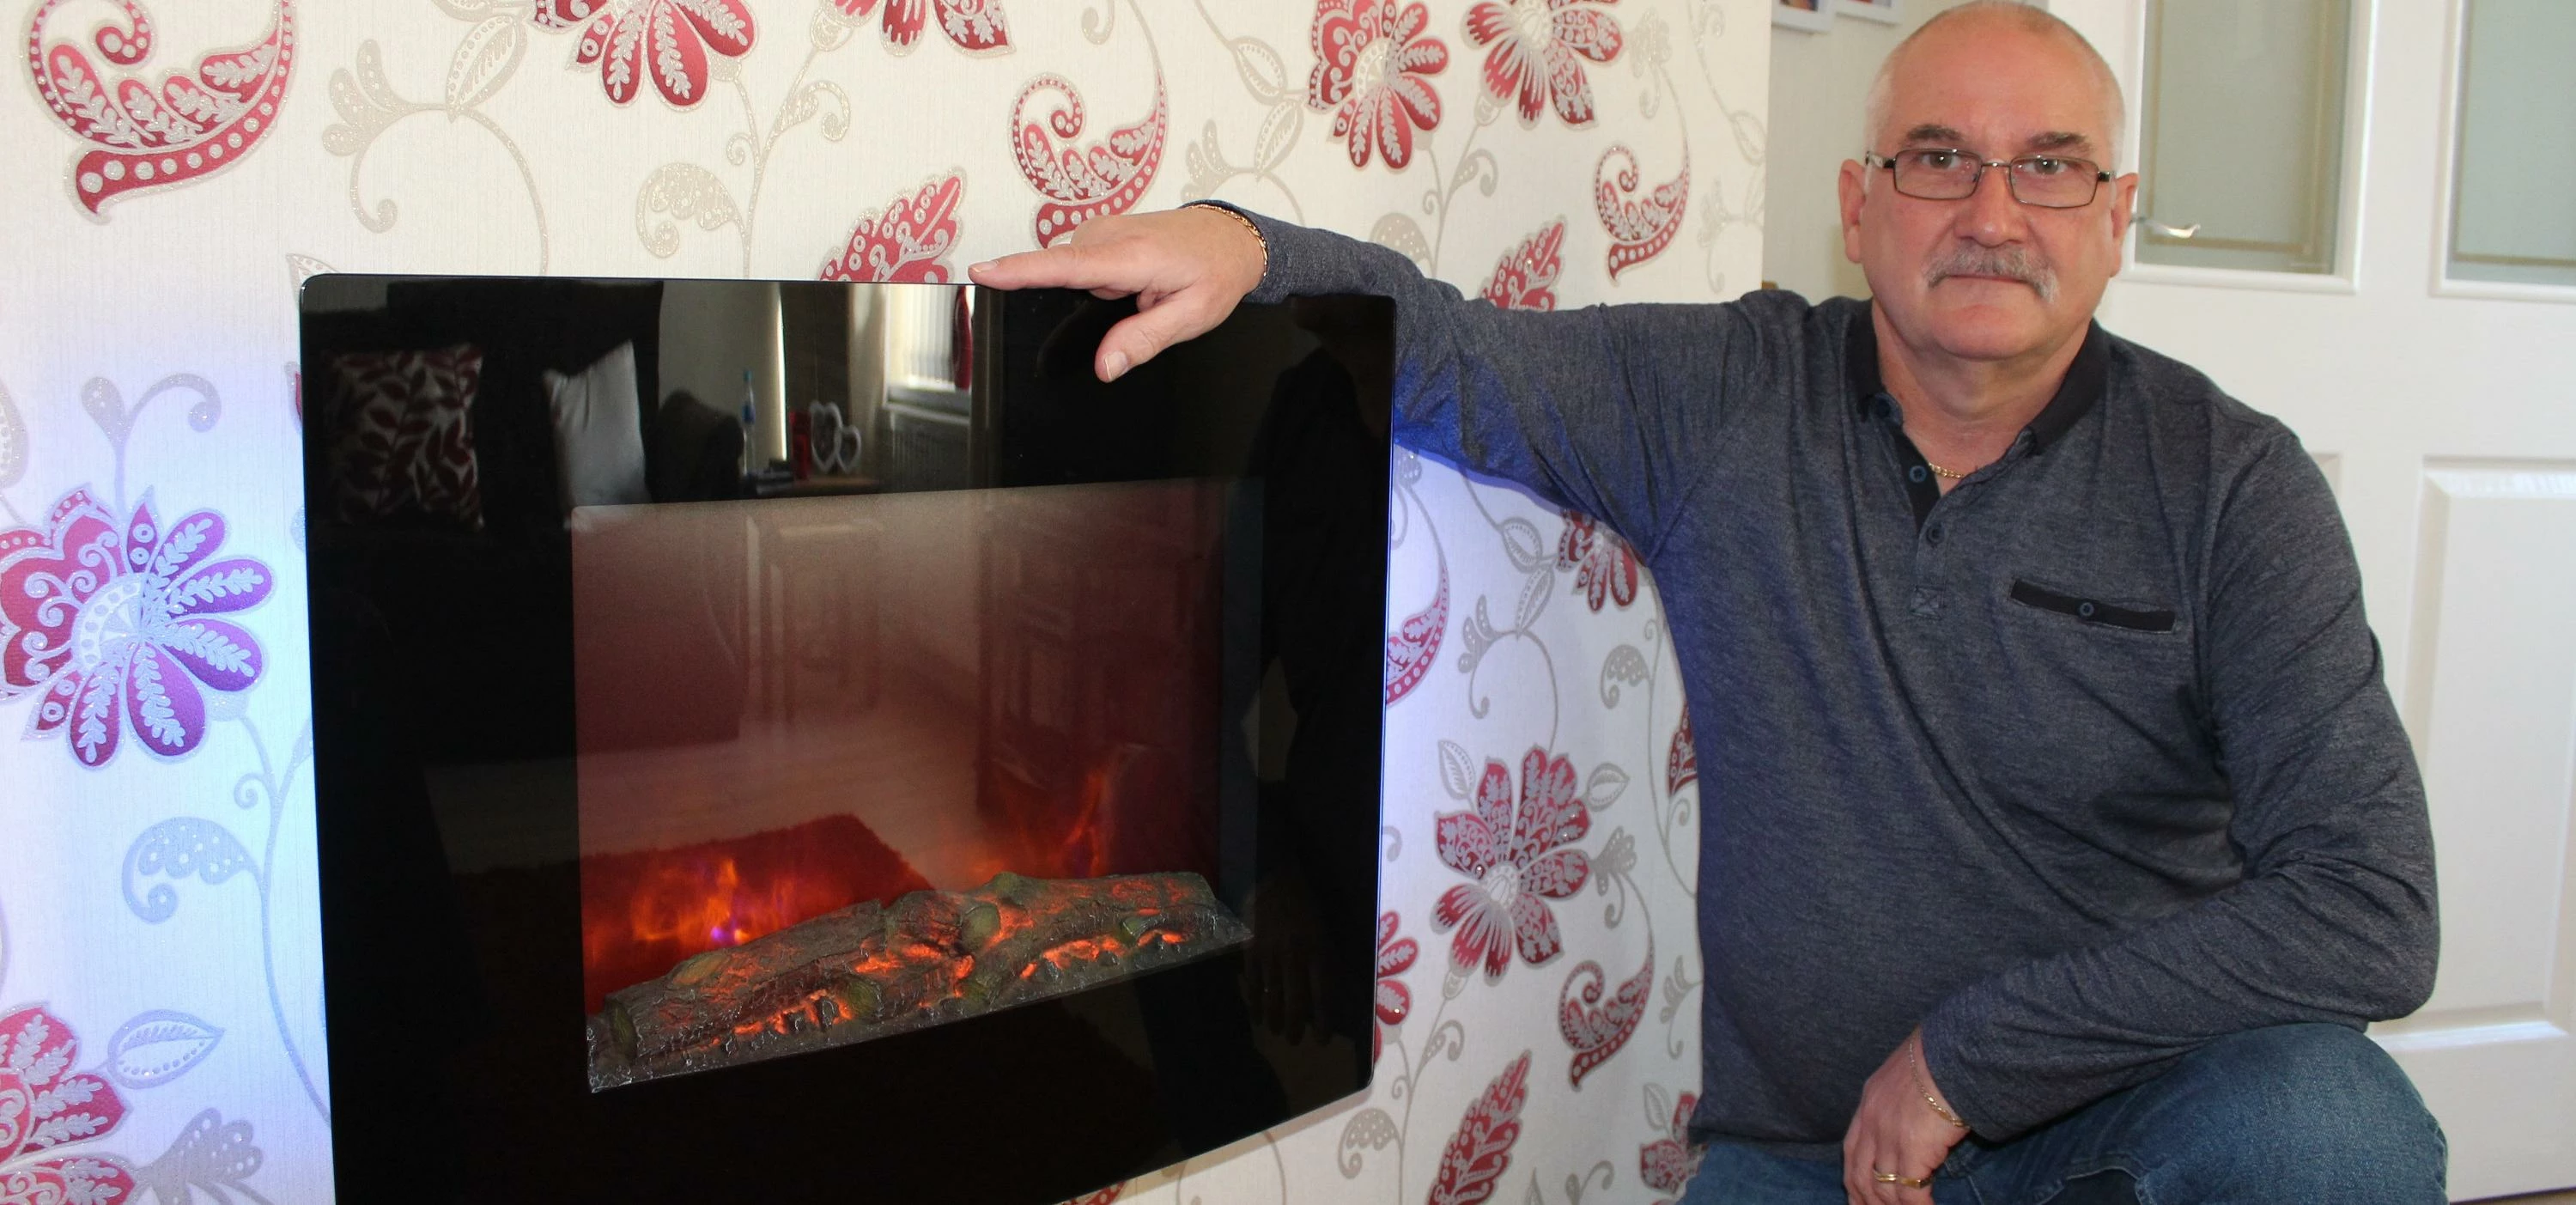  Billy Black with the new fire that has been installed in his home.